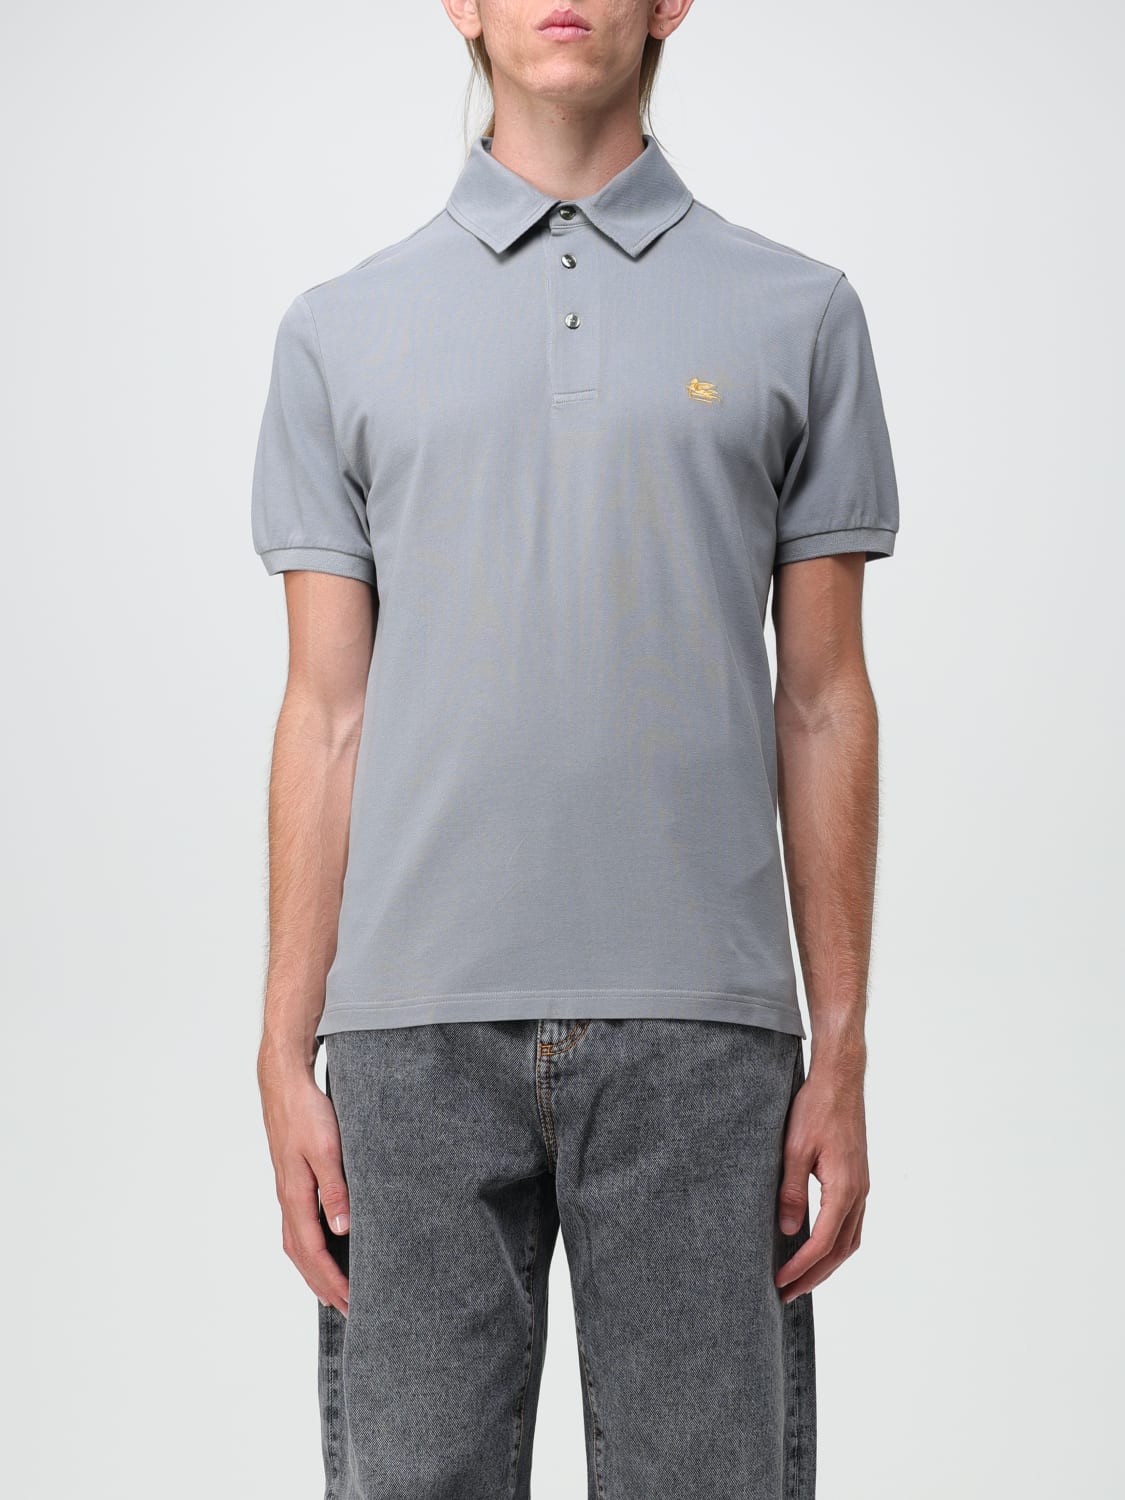 Cotton jersey polo shirt with Web